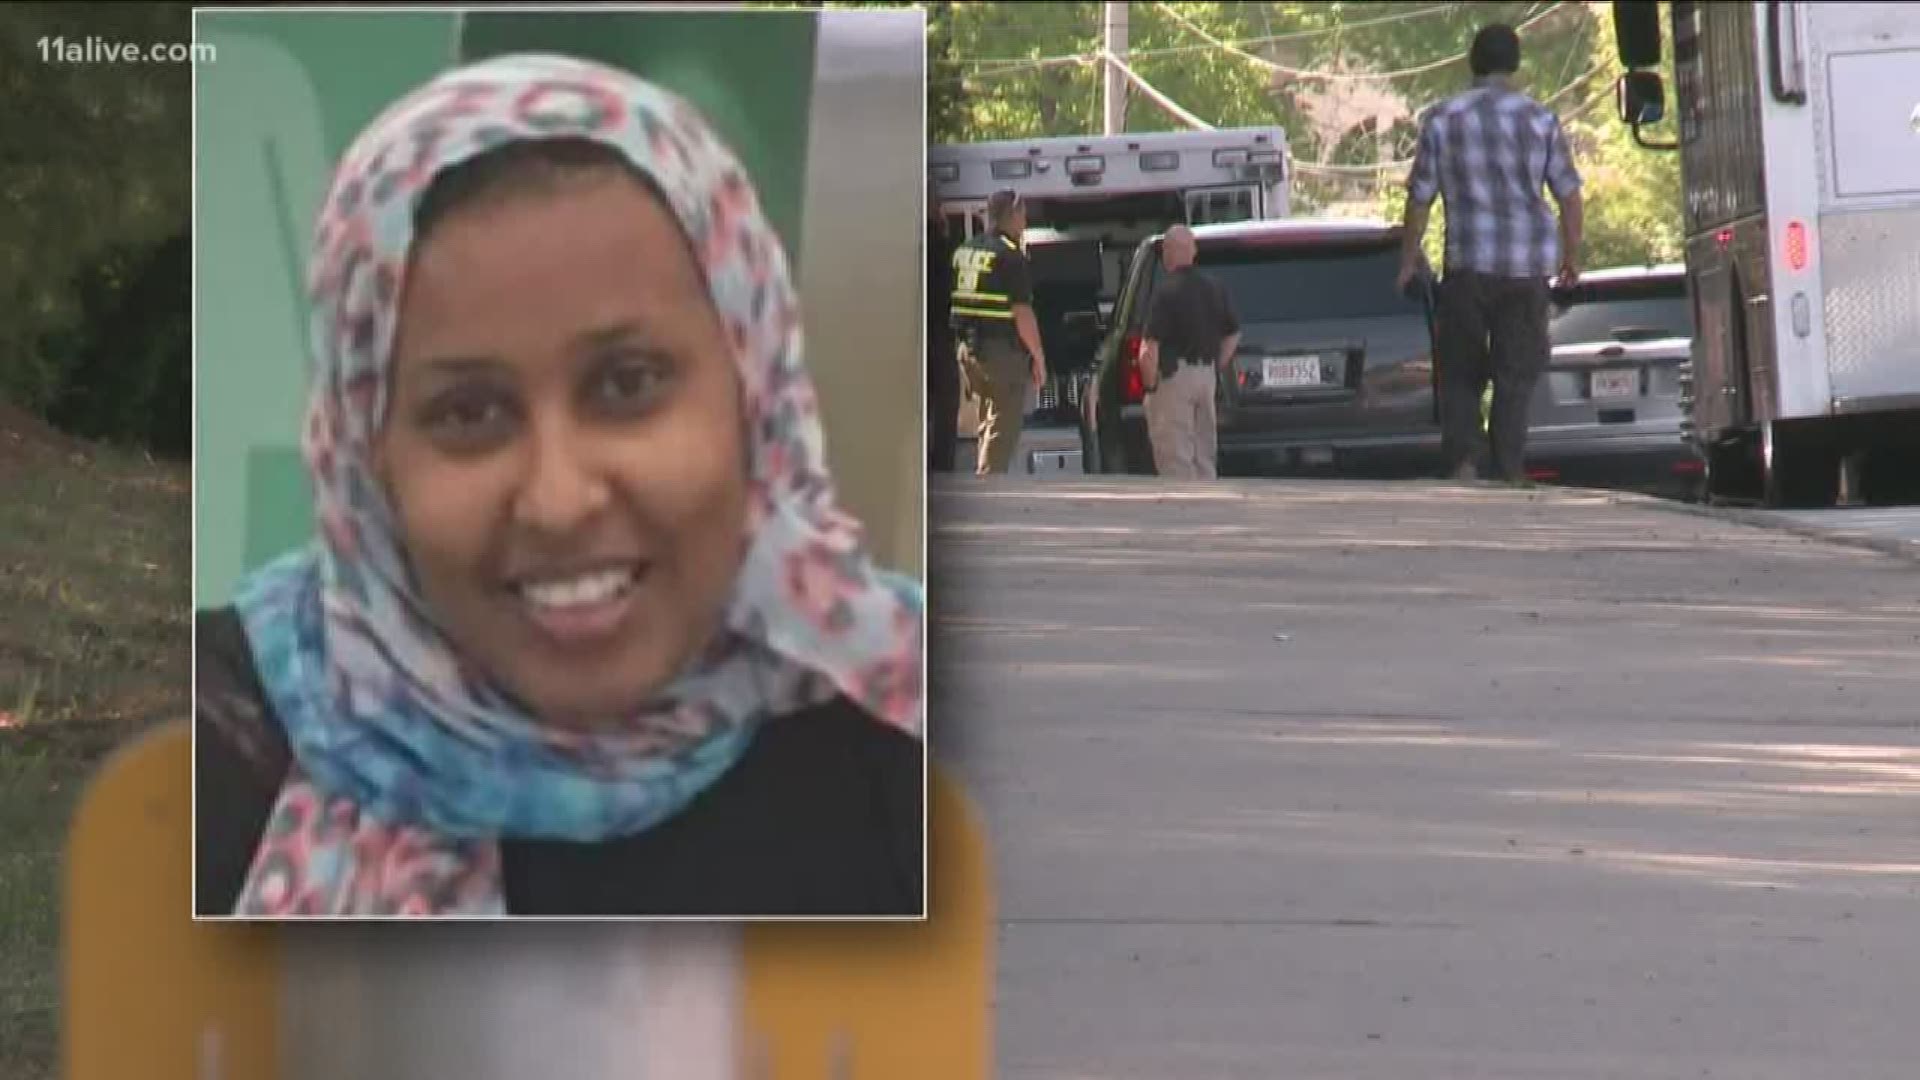 Shukri Ali Said was in a psychotic state when she was shot and killed by police in Johns Creek.